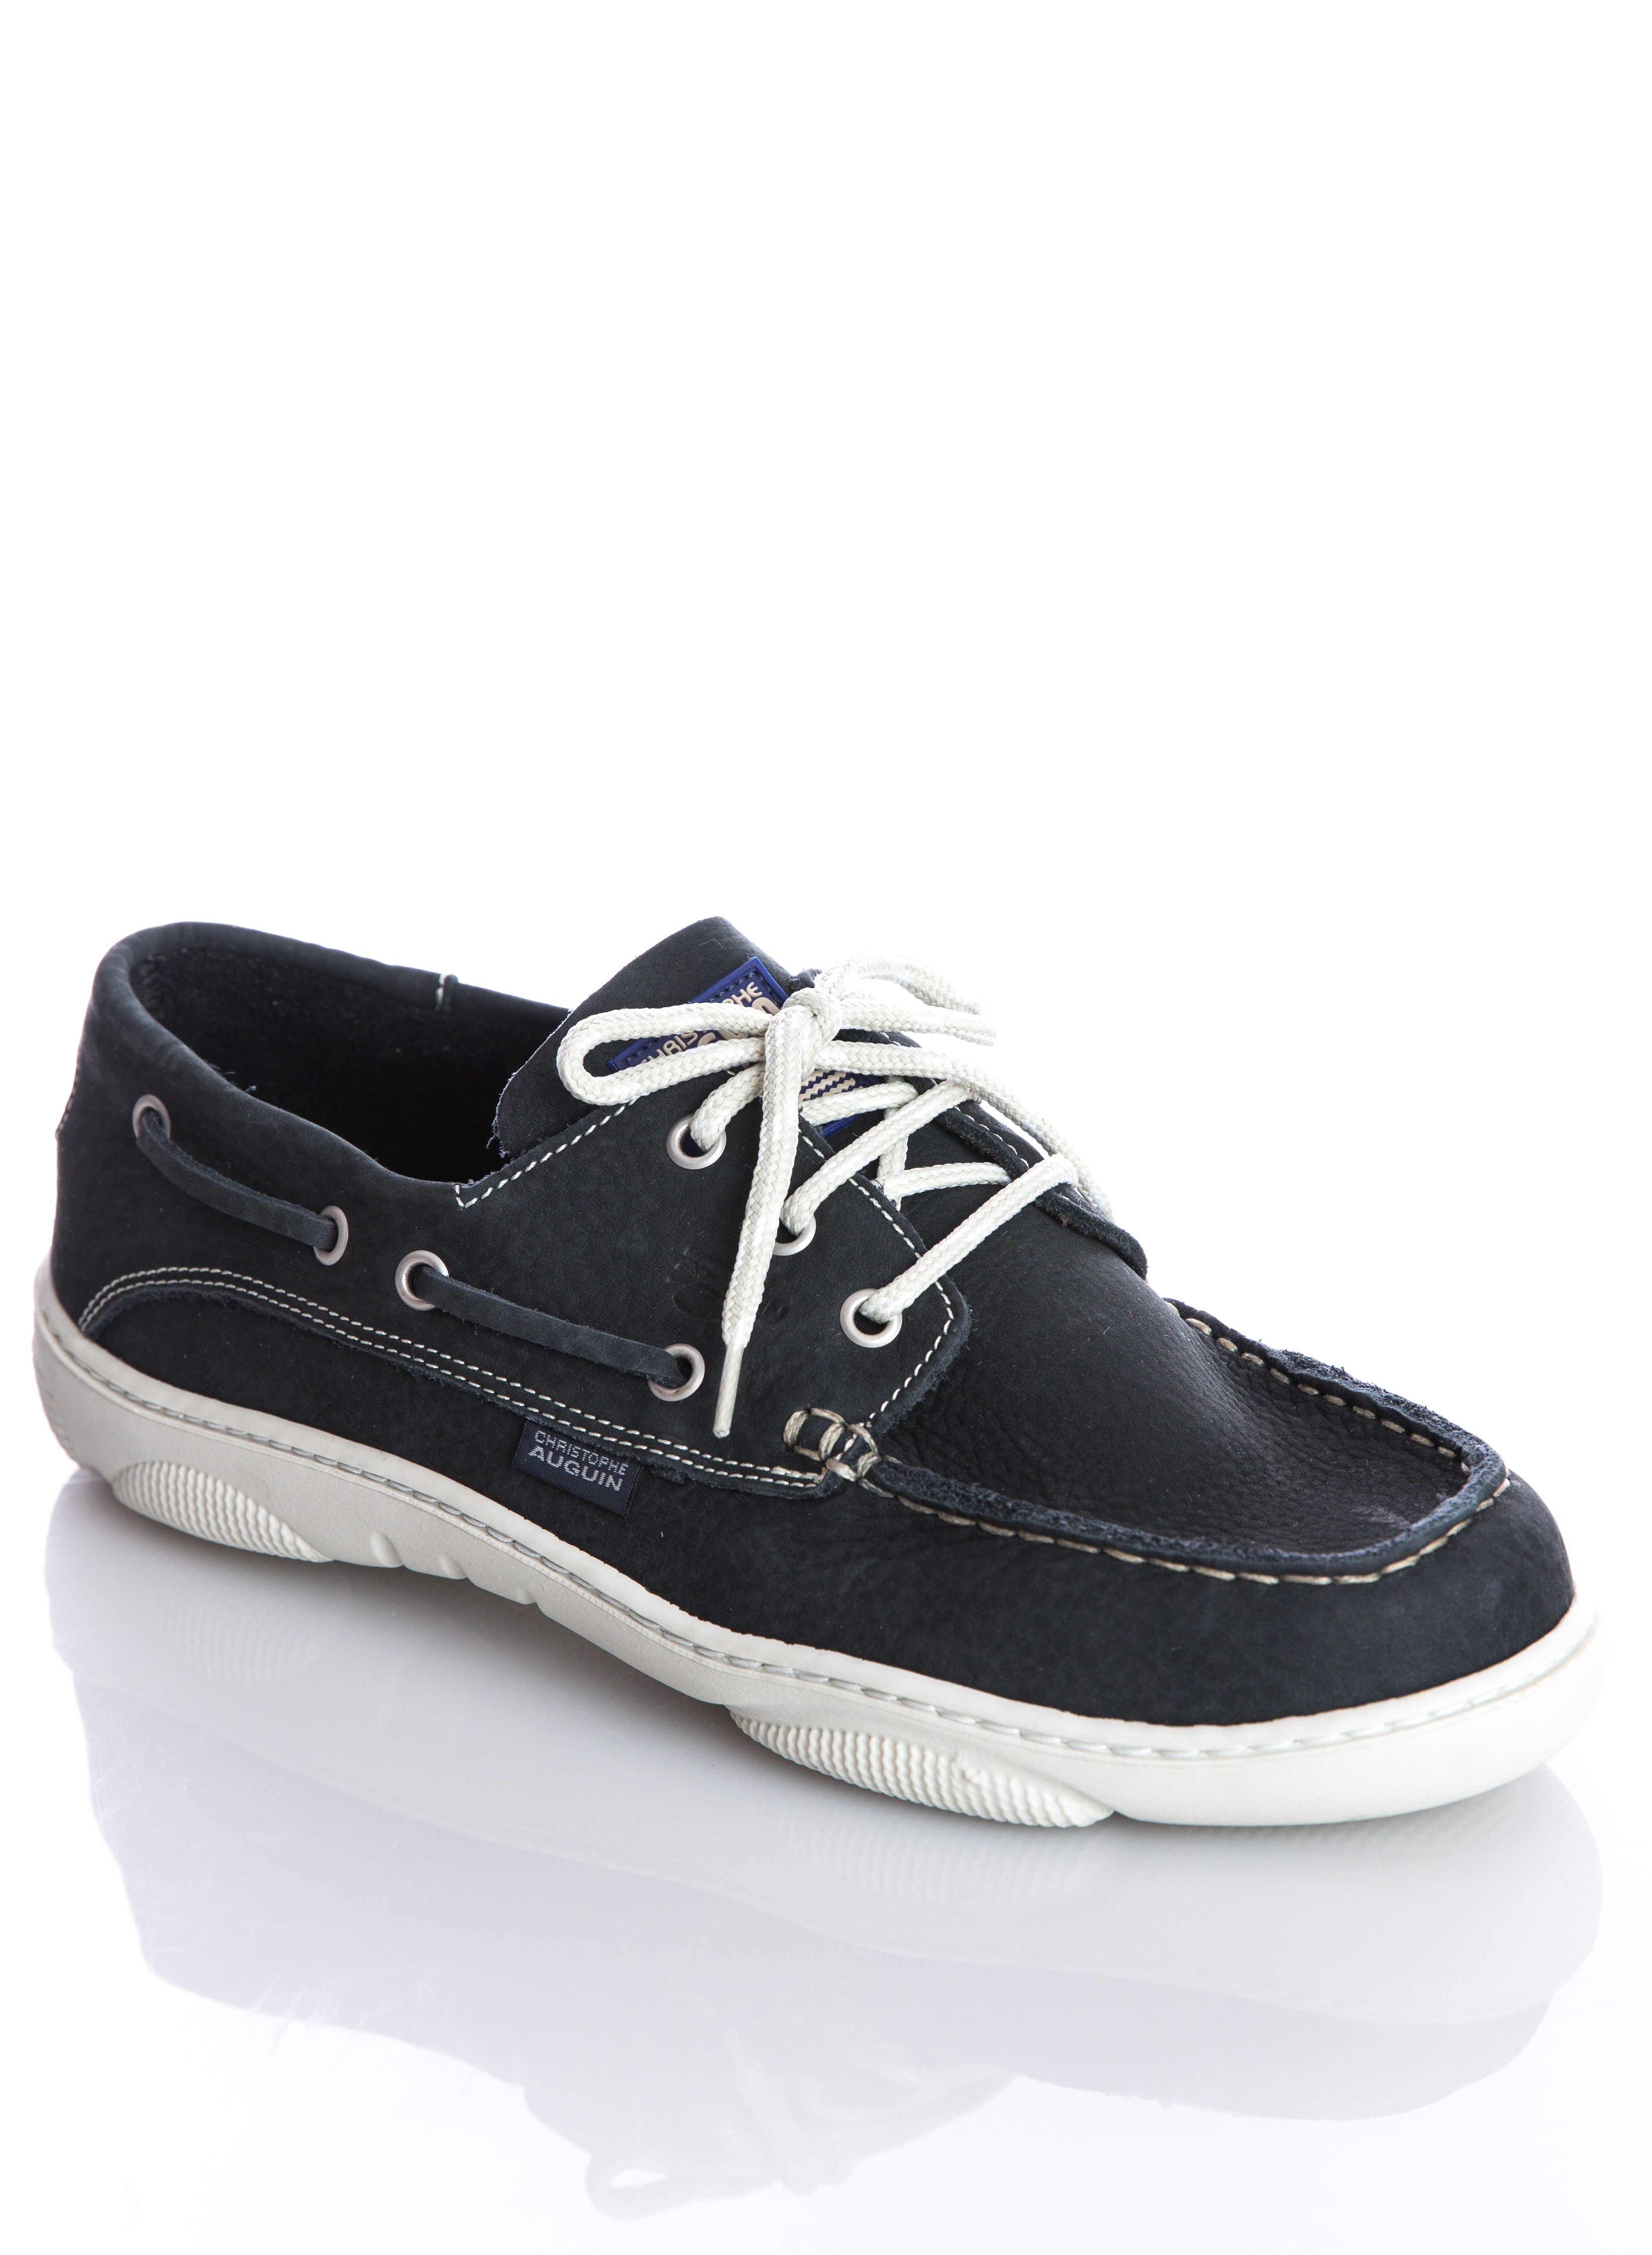 AUGUIN BOAT SHOE - CHRISTOPHE AUGUIN STOCK SERVICE : SHOES : Digby's ...